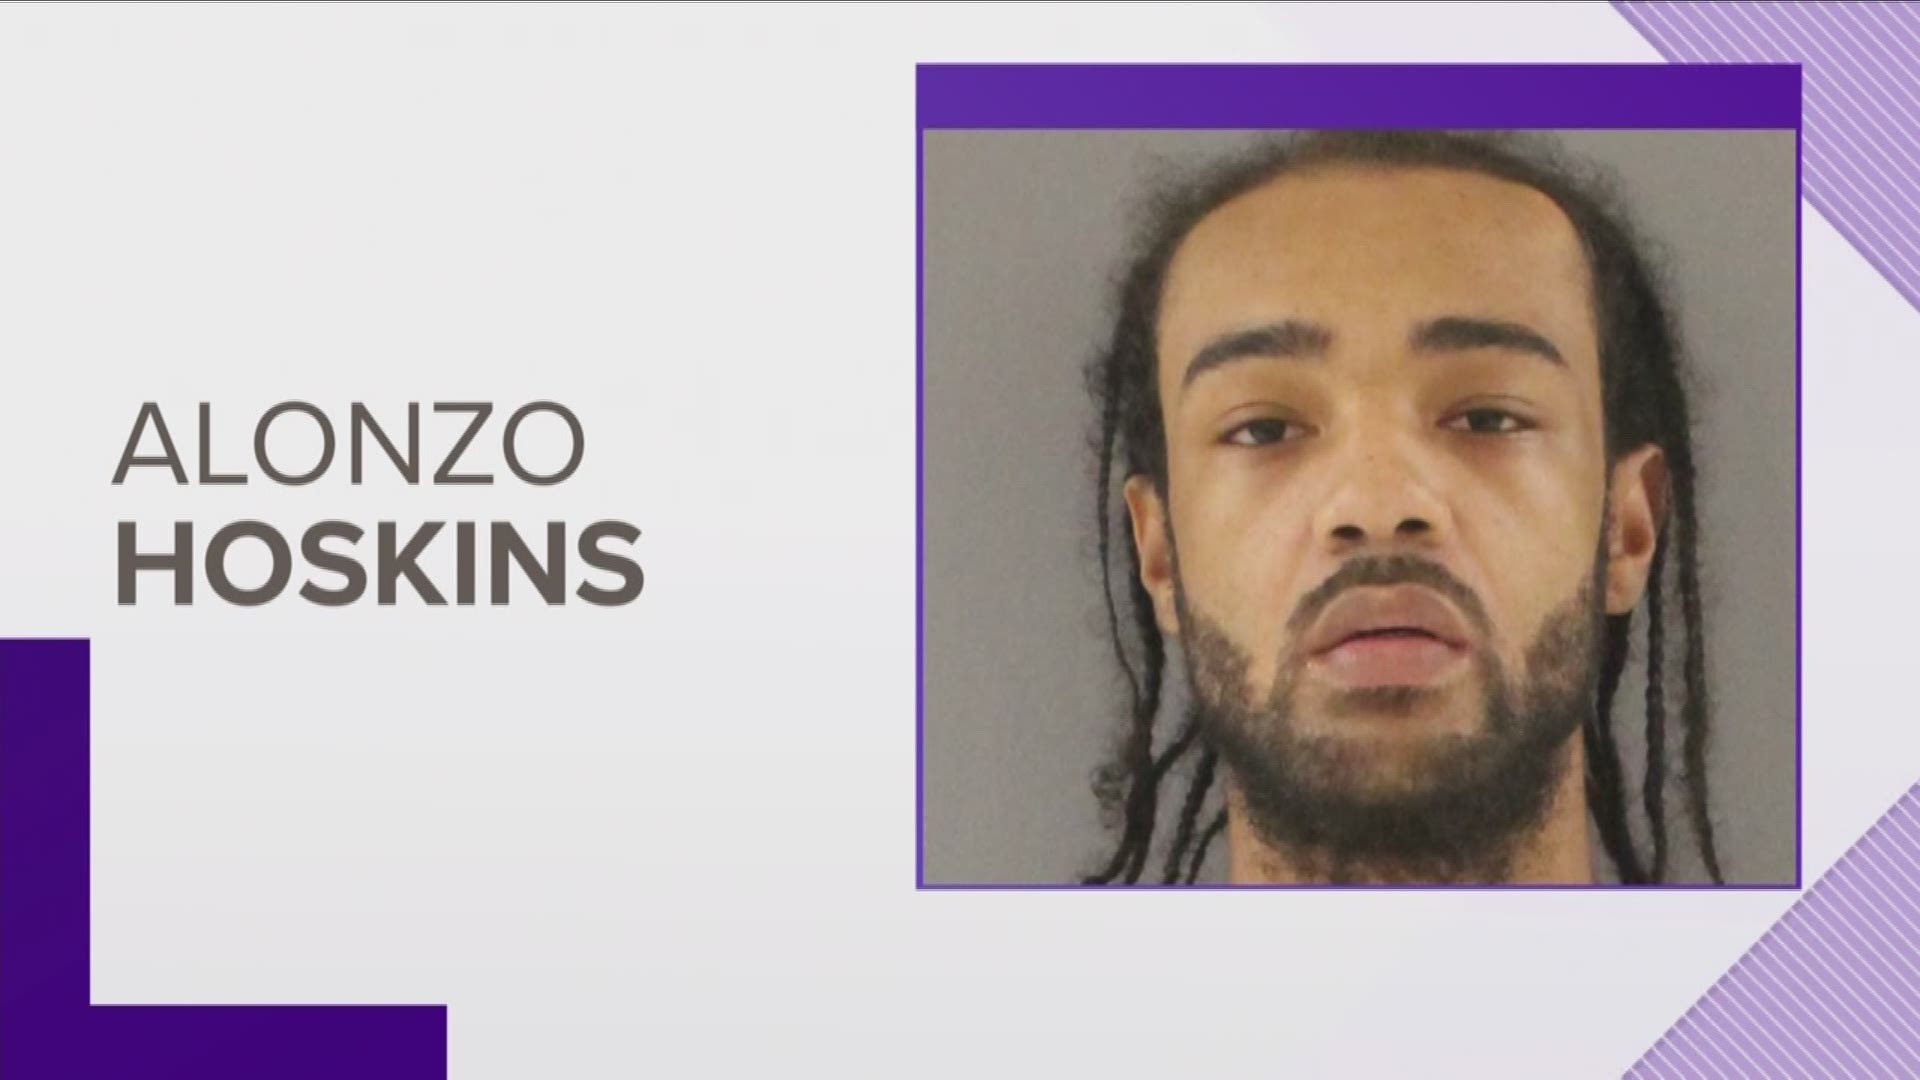 He's accused of shooting and killing a man who was discovered in his blue Chrysler minivan in the parking lot at the Red Roof Inn in May 2017.